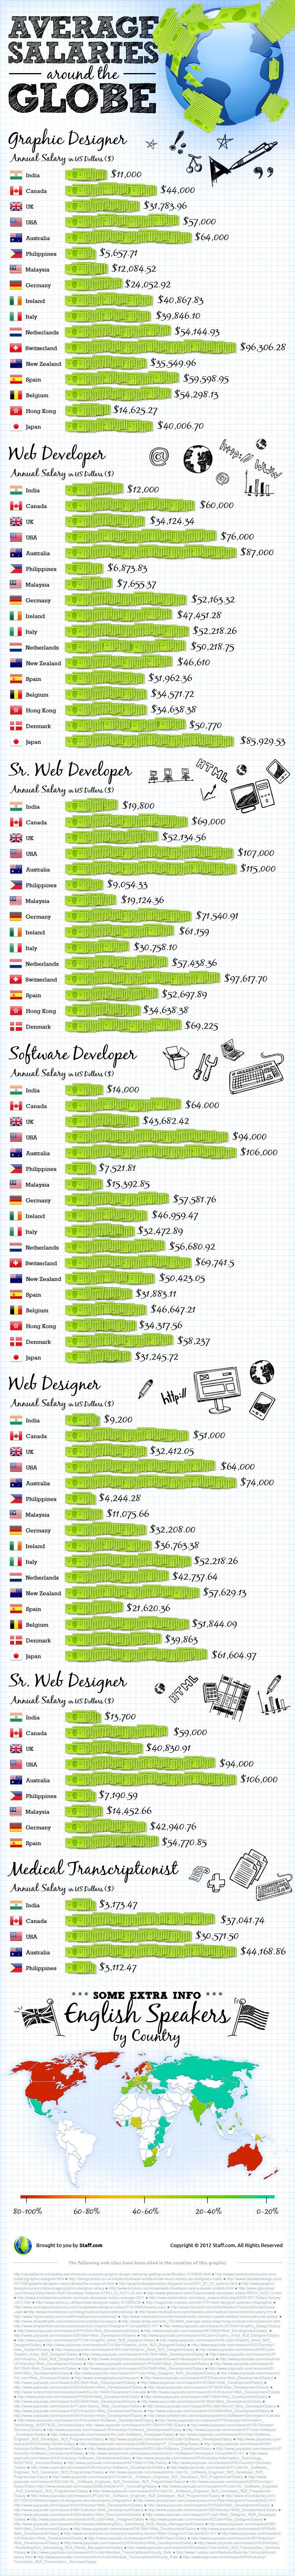 Average Salaries of Web Developers in India, the Philippines, USA and around the World